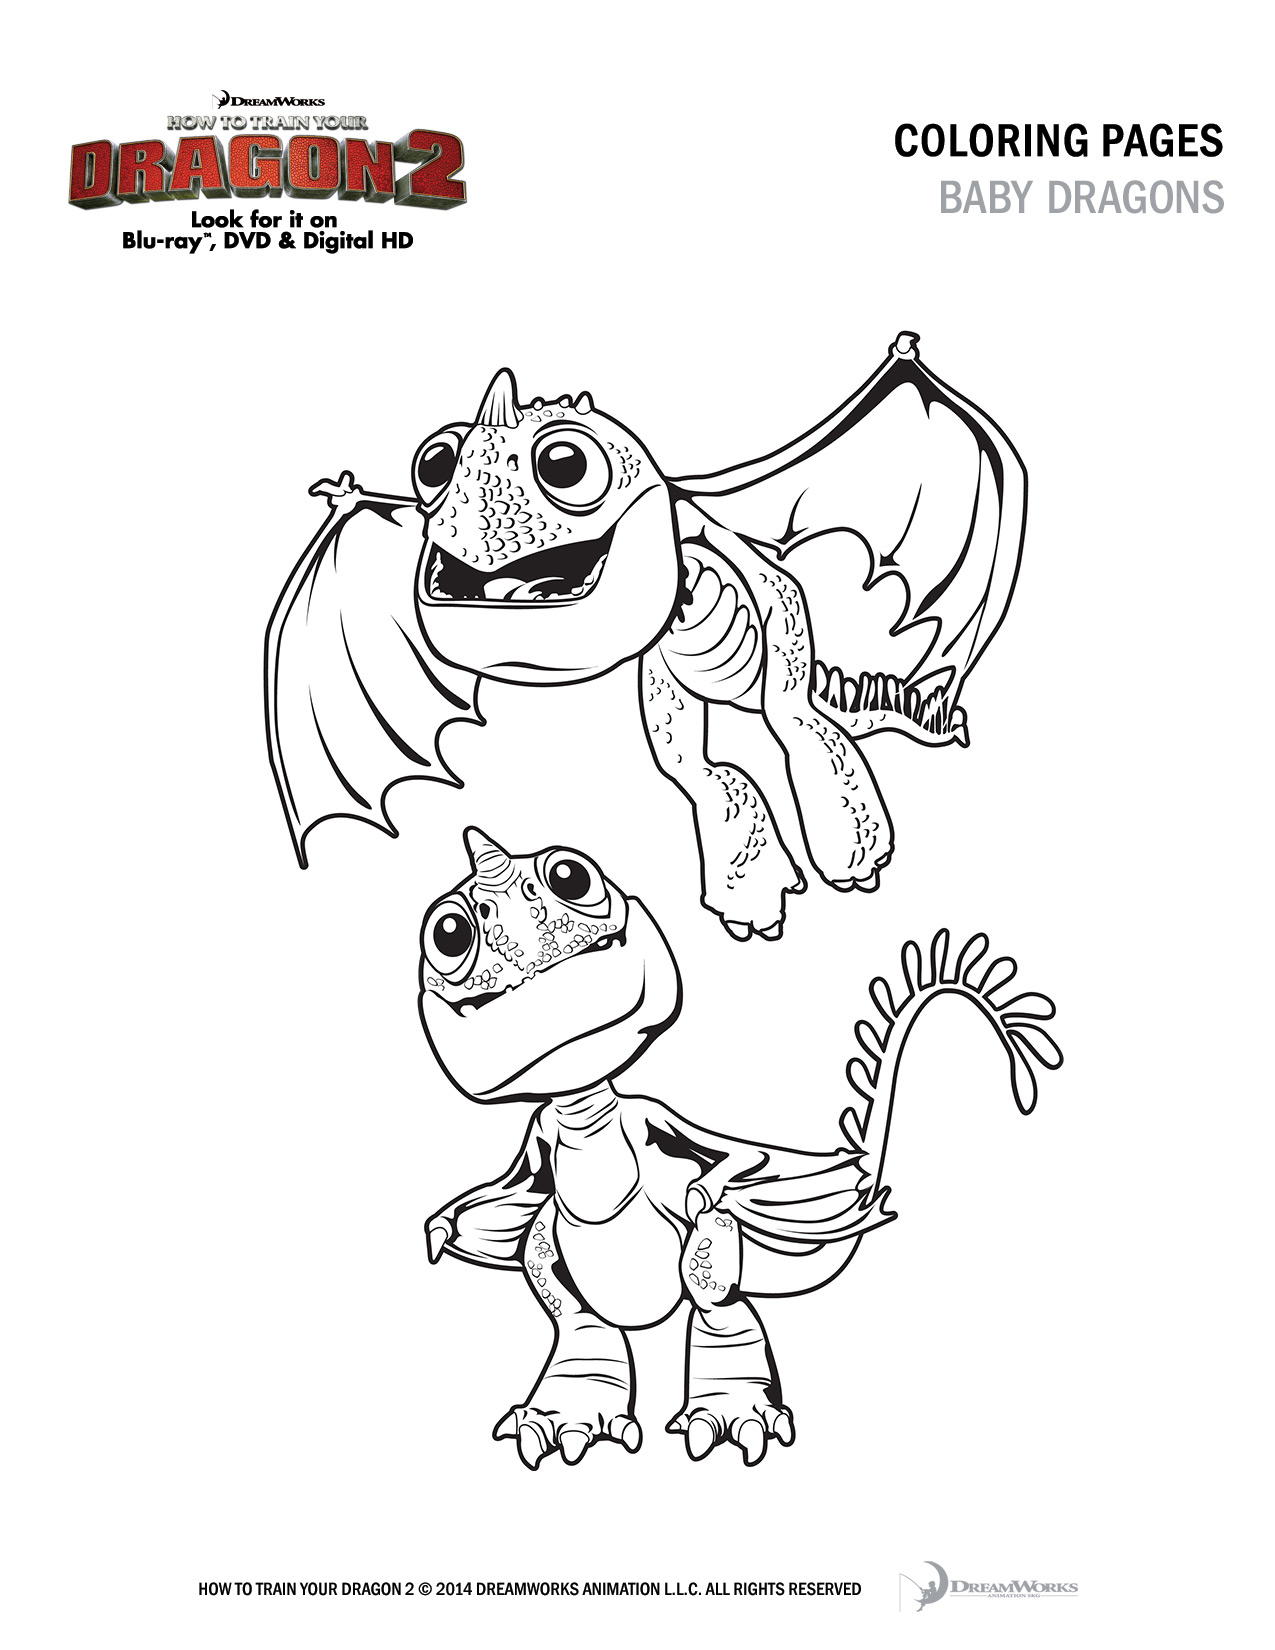 How to Train Your Dragon 2 Free Coloring and Activity ...